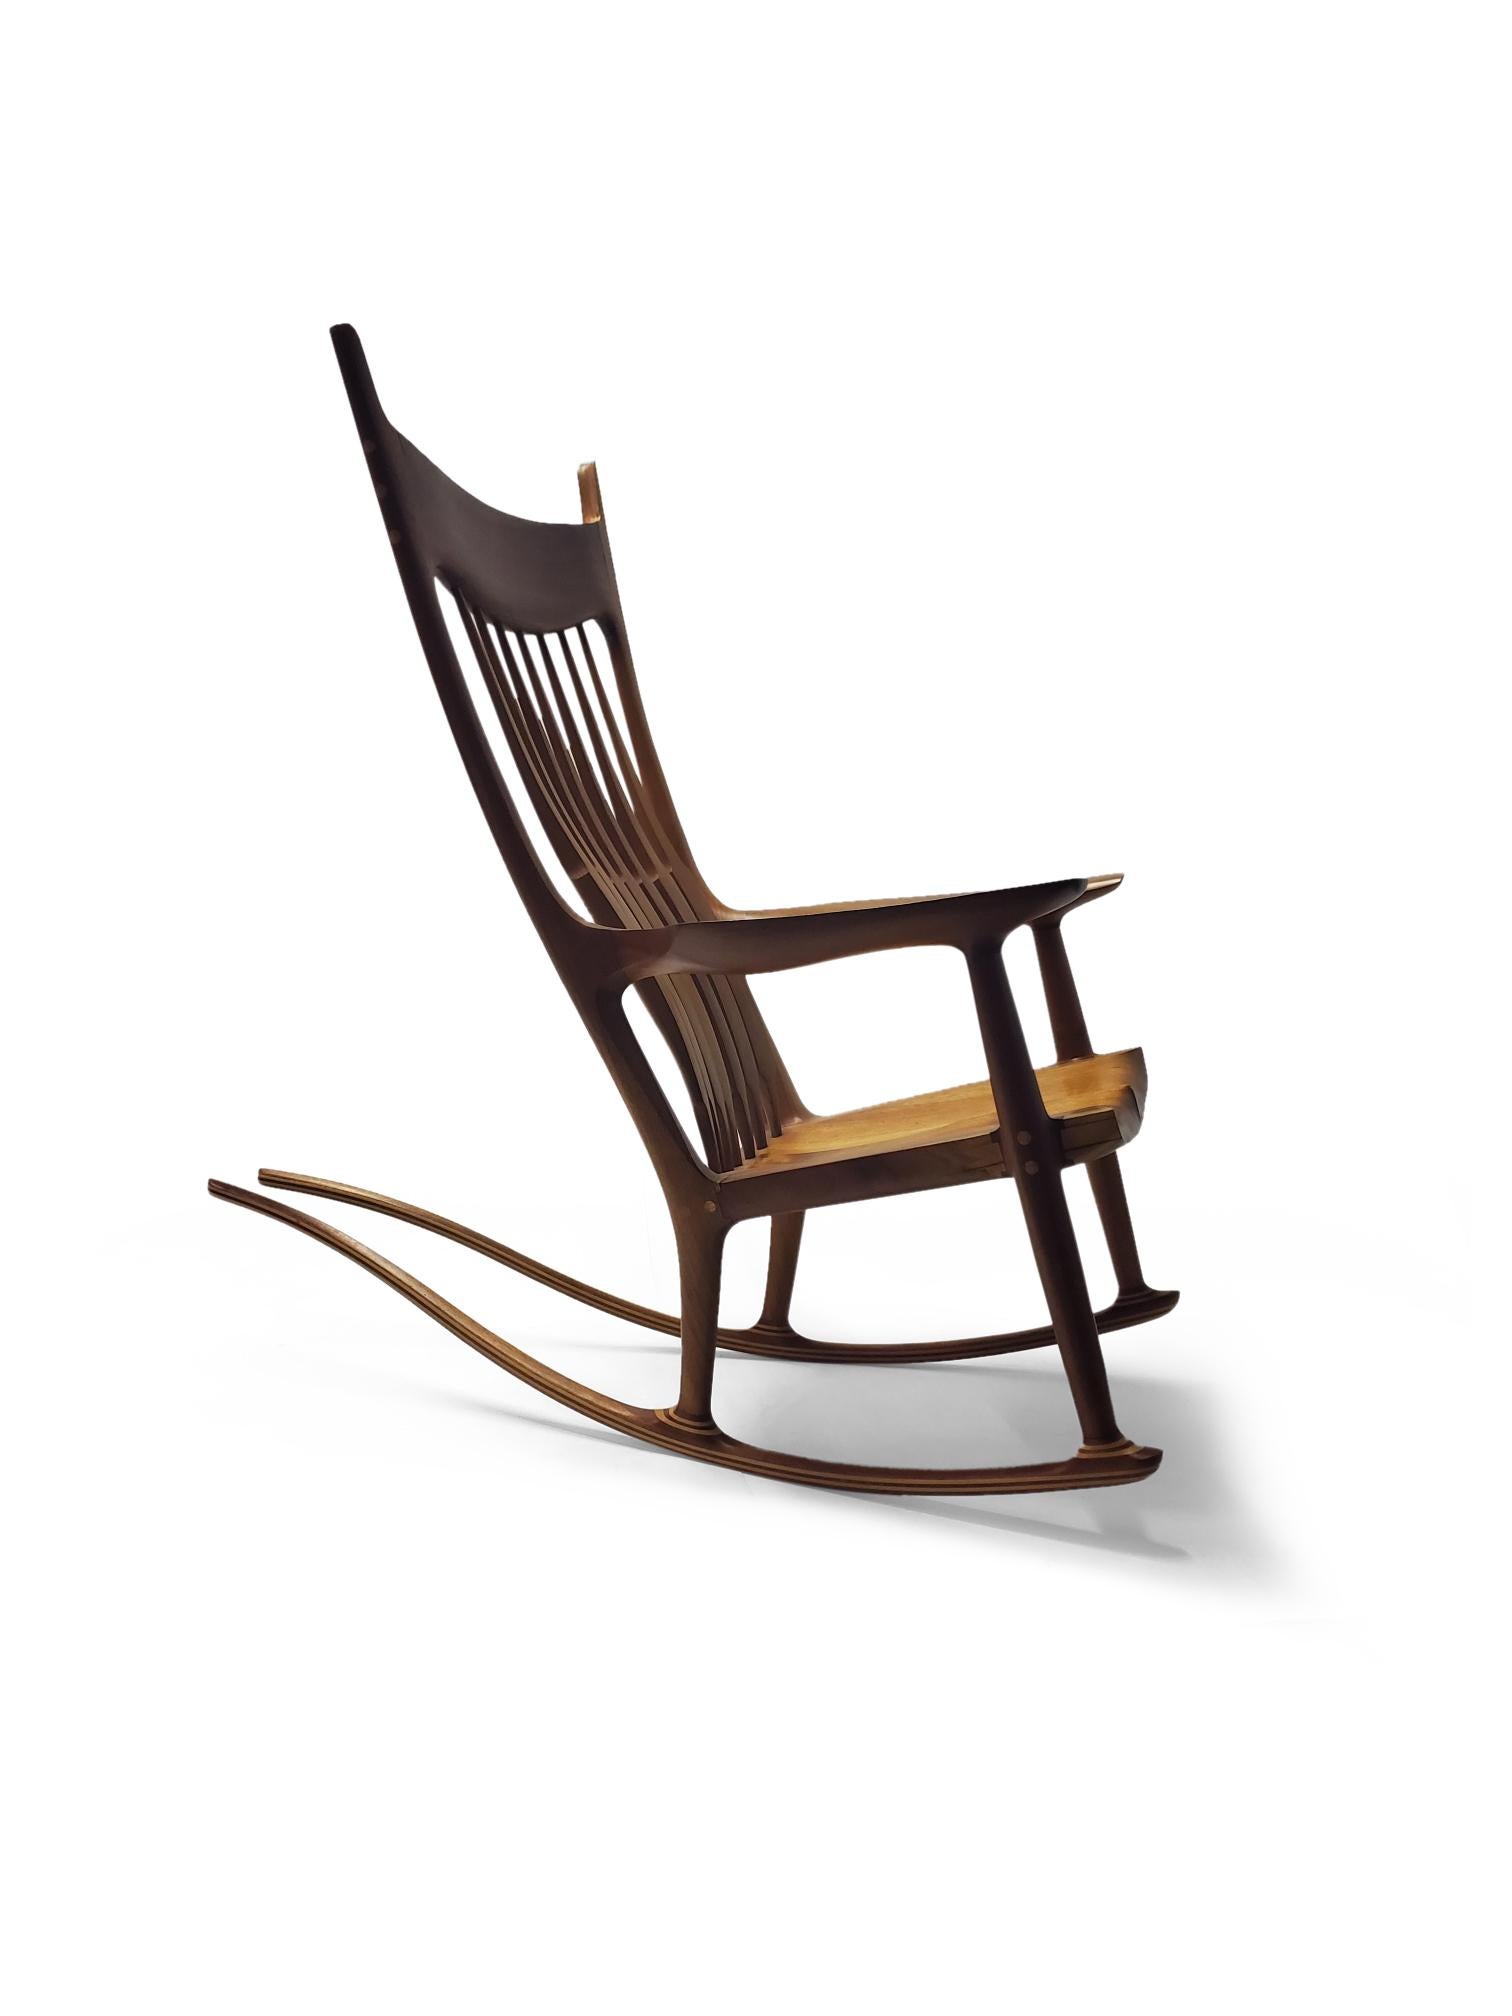 20th Century Vintage Sam Maloof Style Rocking Chair  For Sale